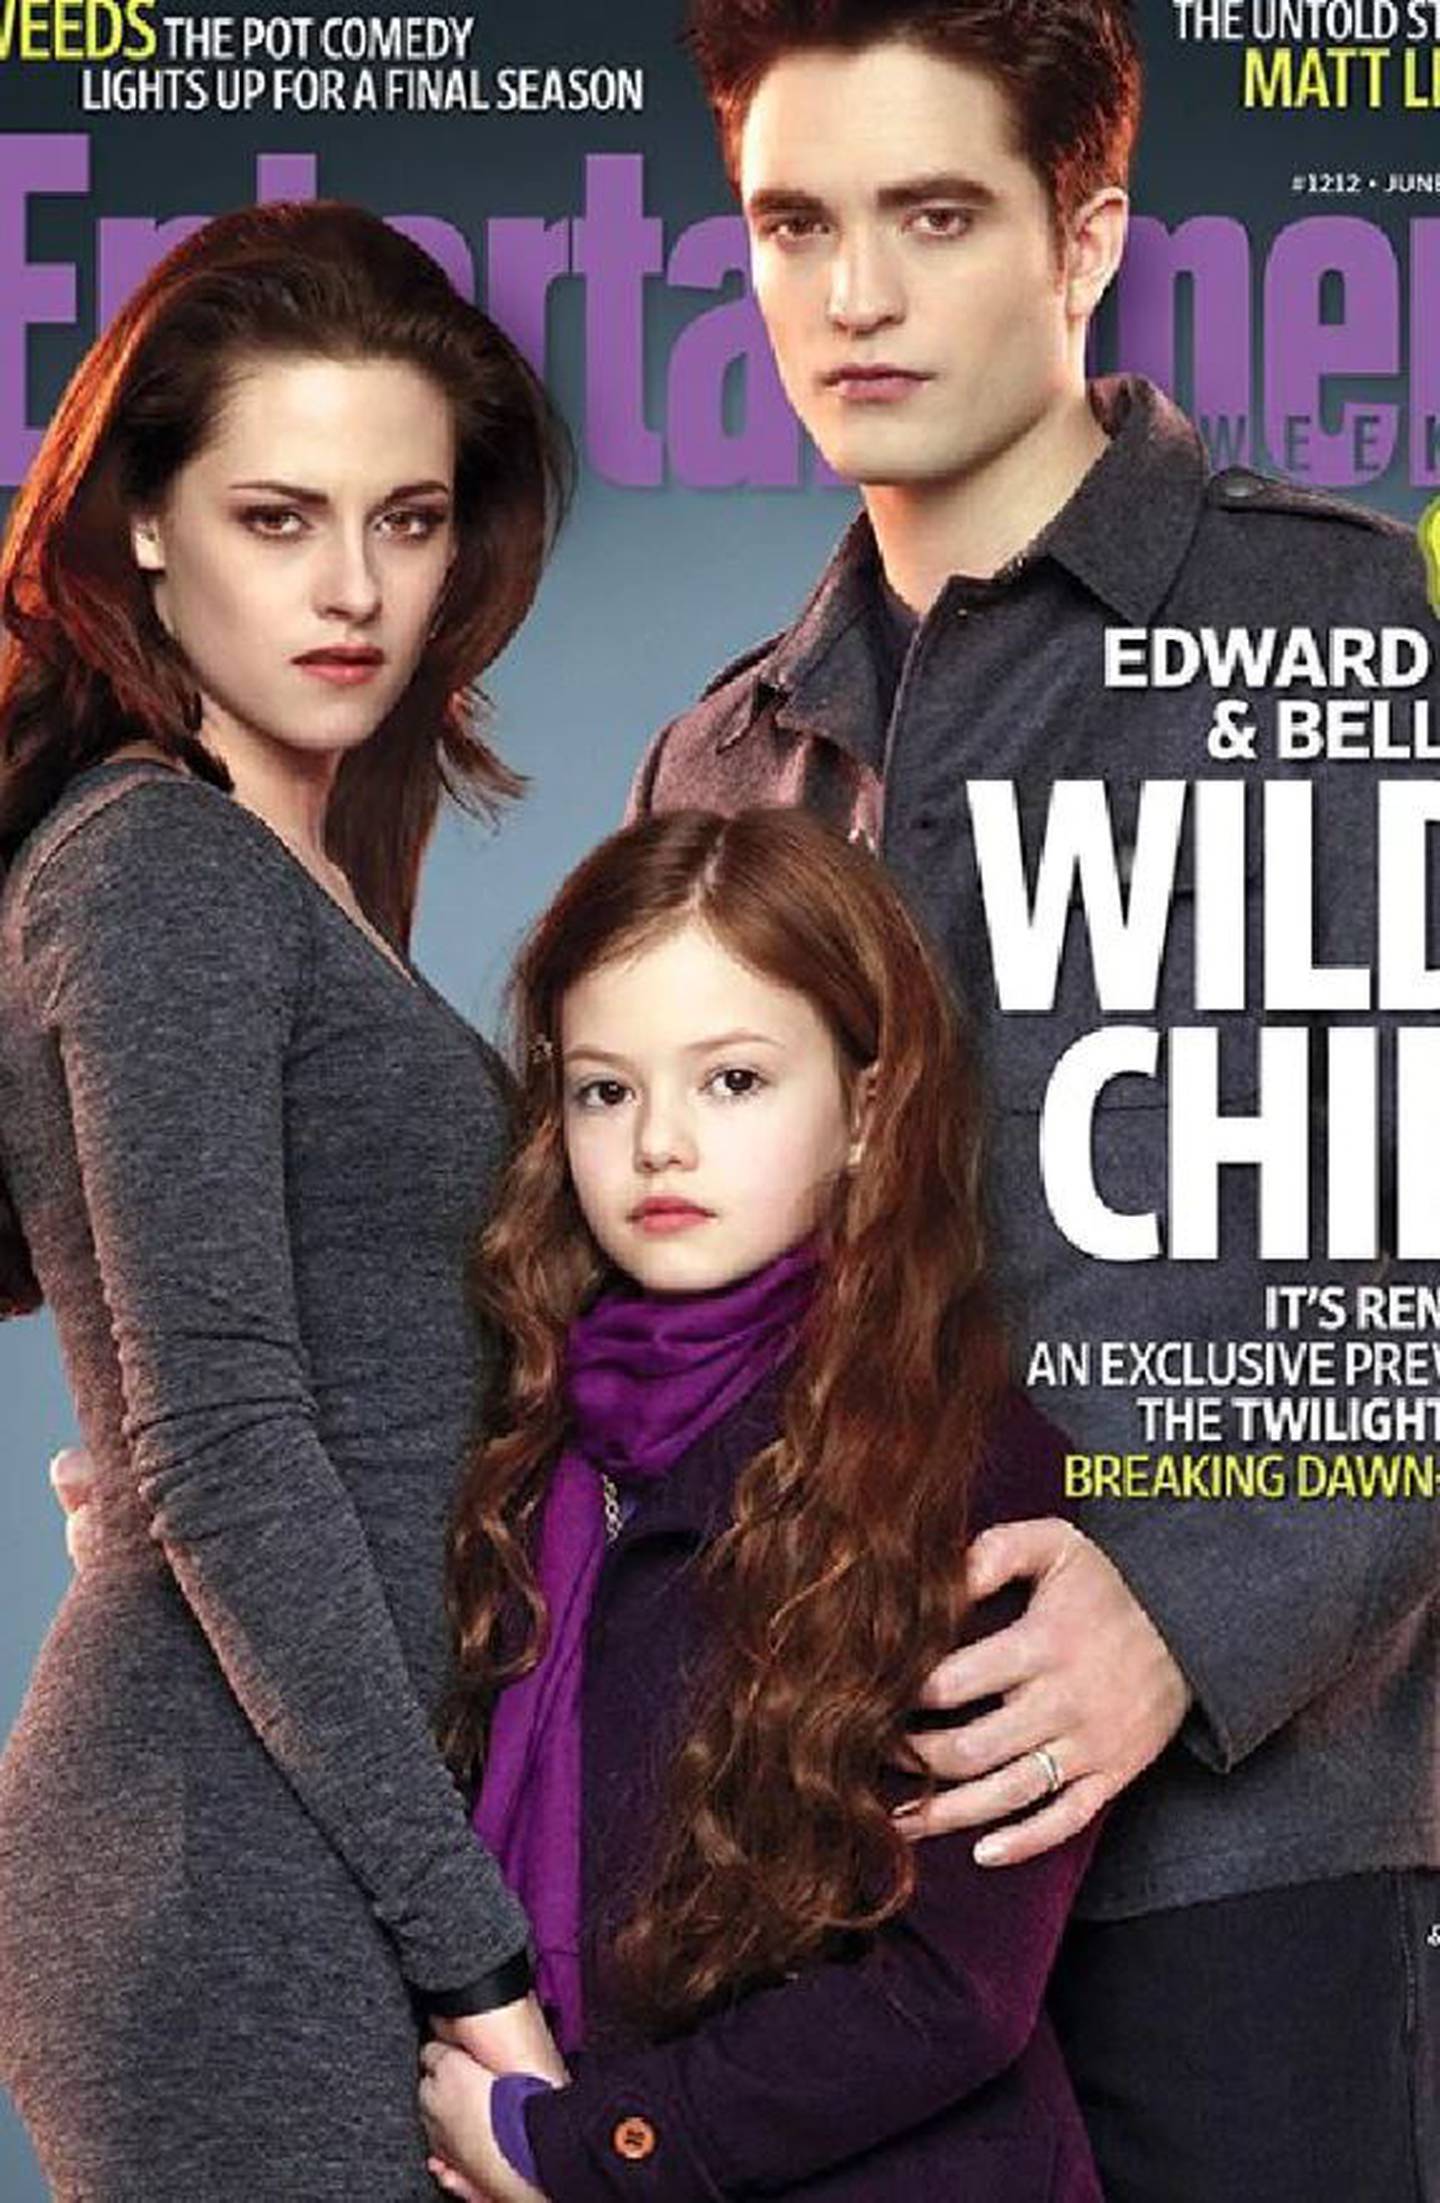 Twilight and its stars provided a whole lot of fodder for the tabloids. Photo / Supplied